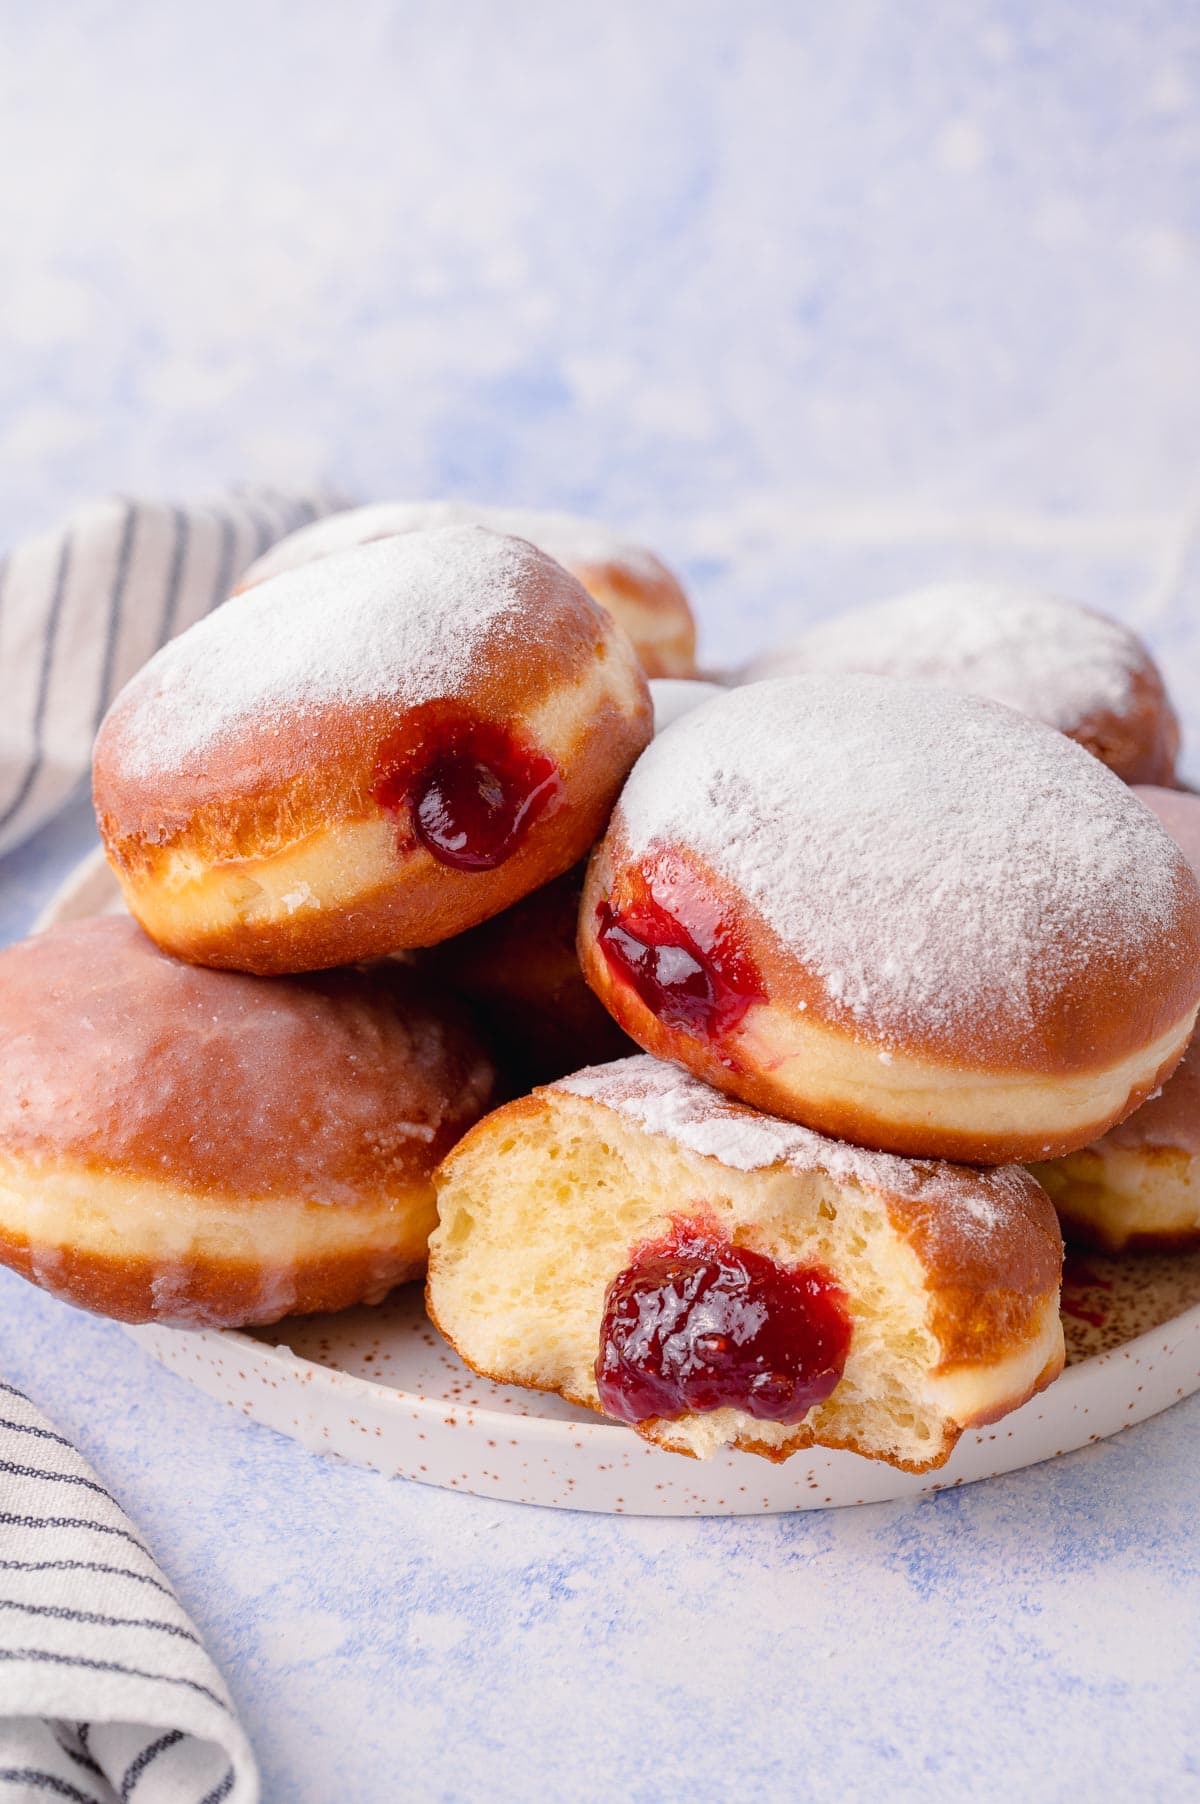 Paczki donuts on a white plate on a blue background.